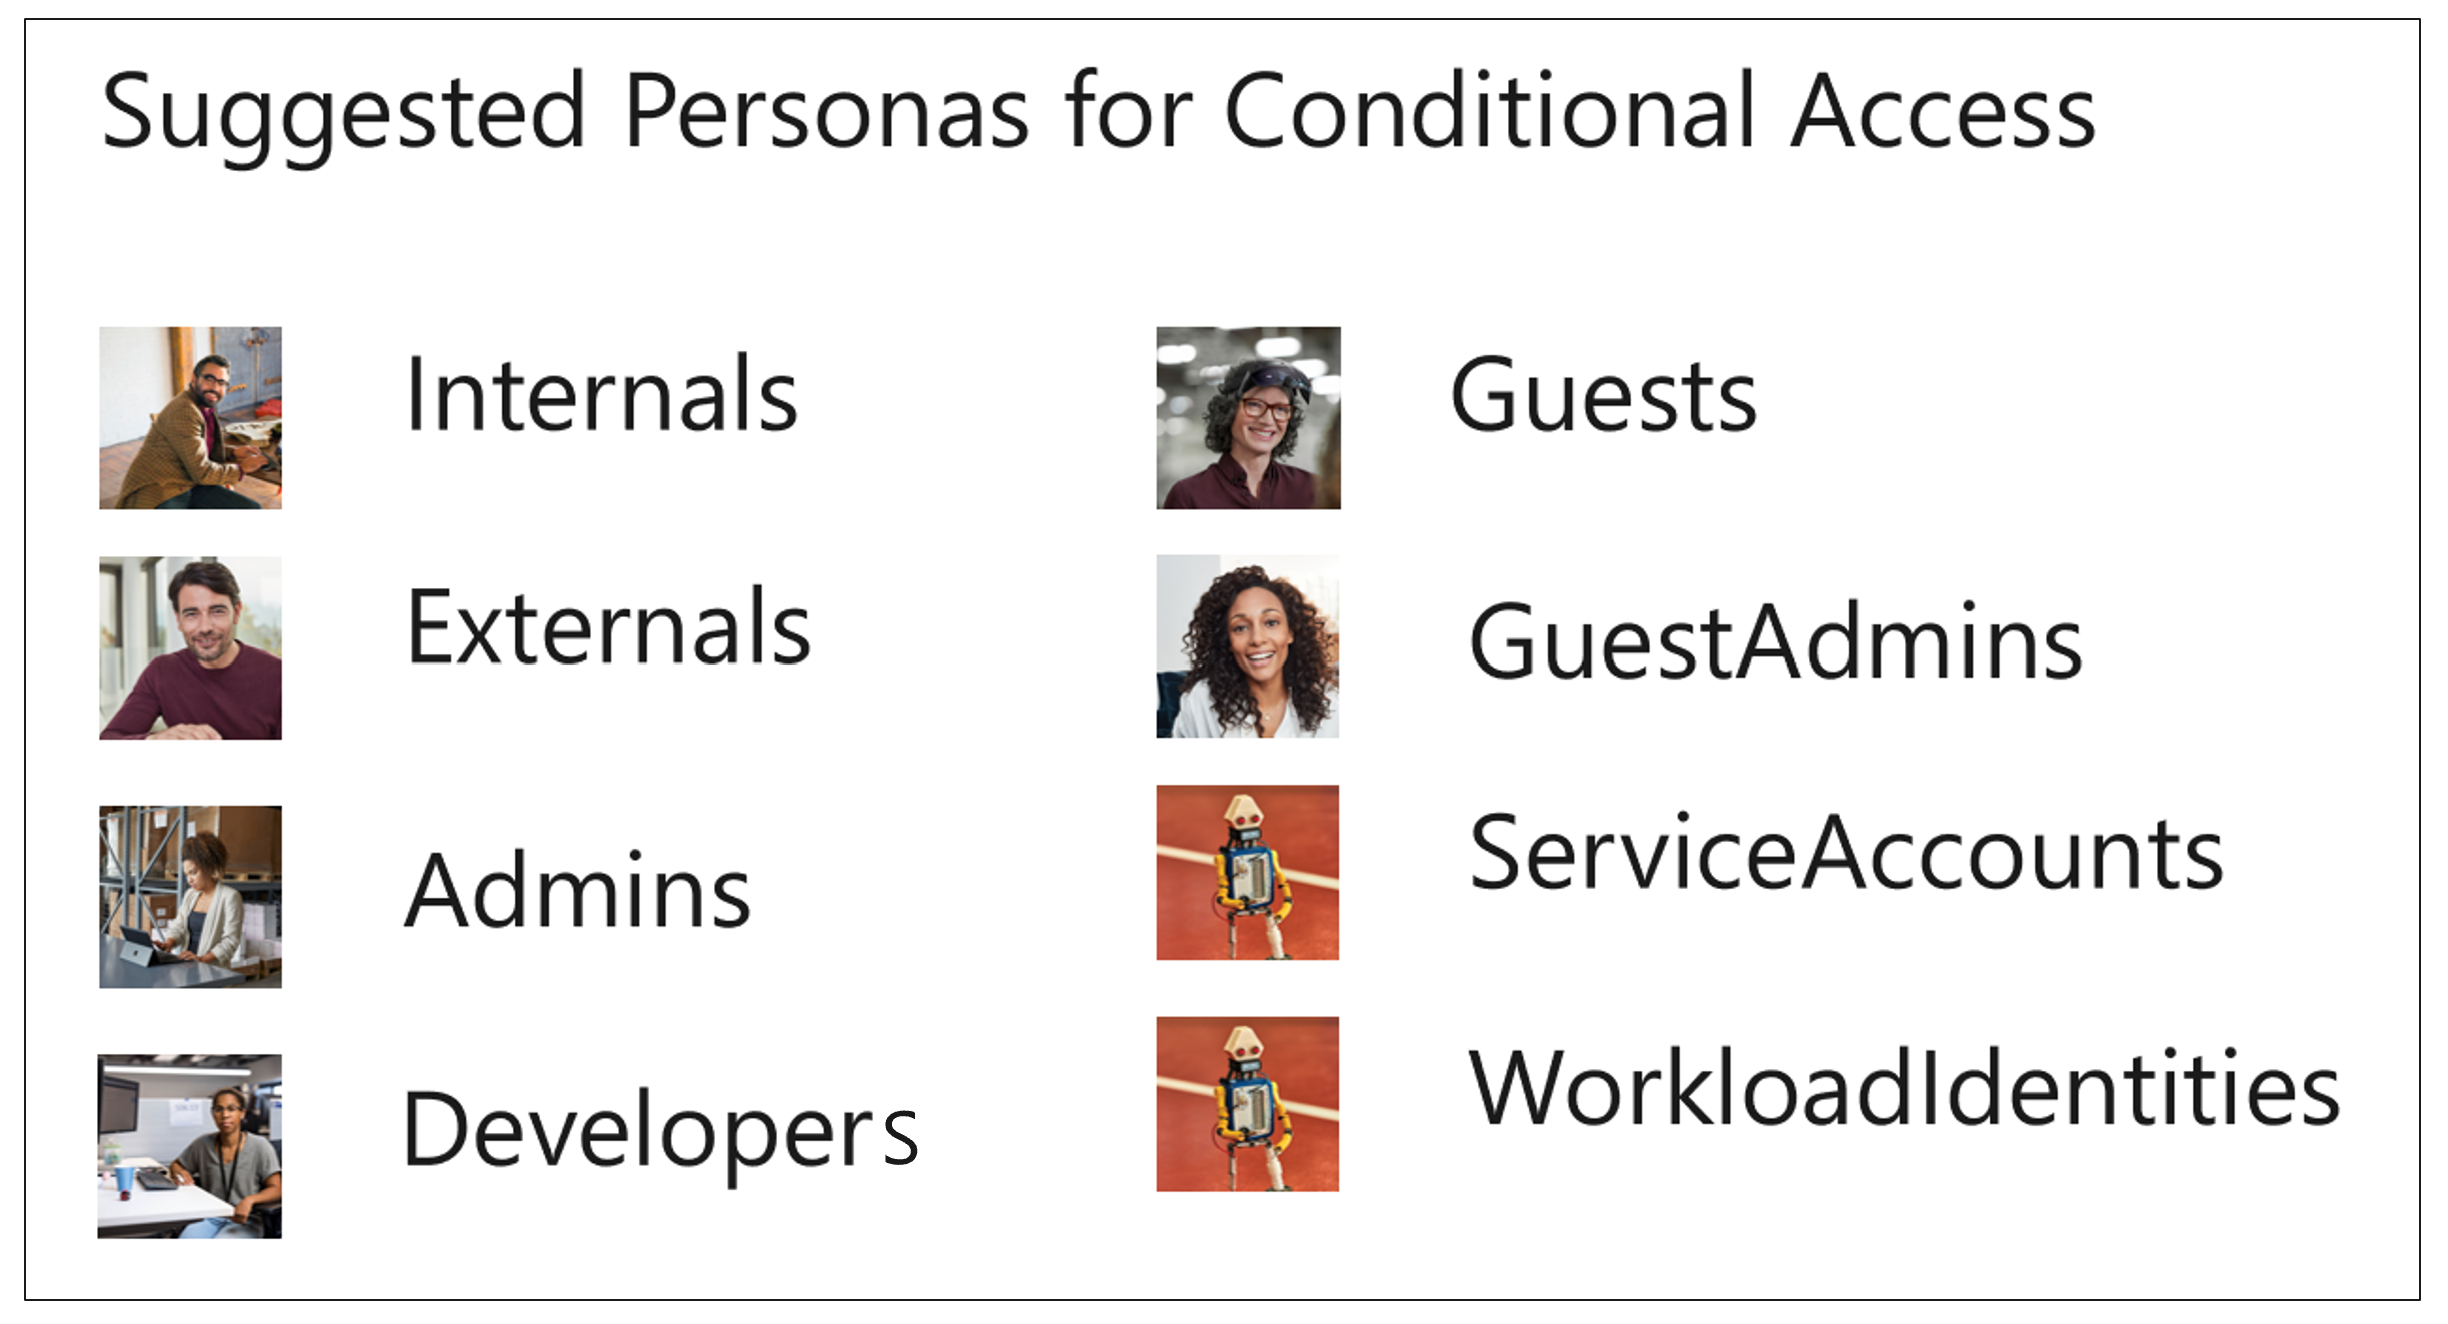 Image that shows recommended Conditional Access personas.